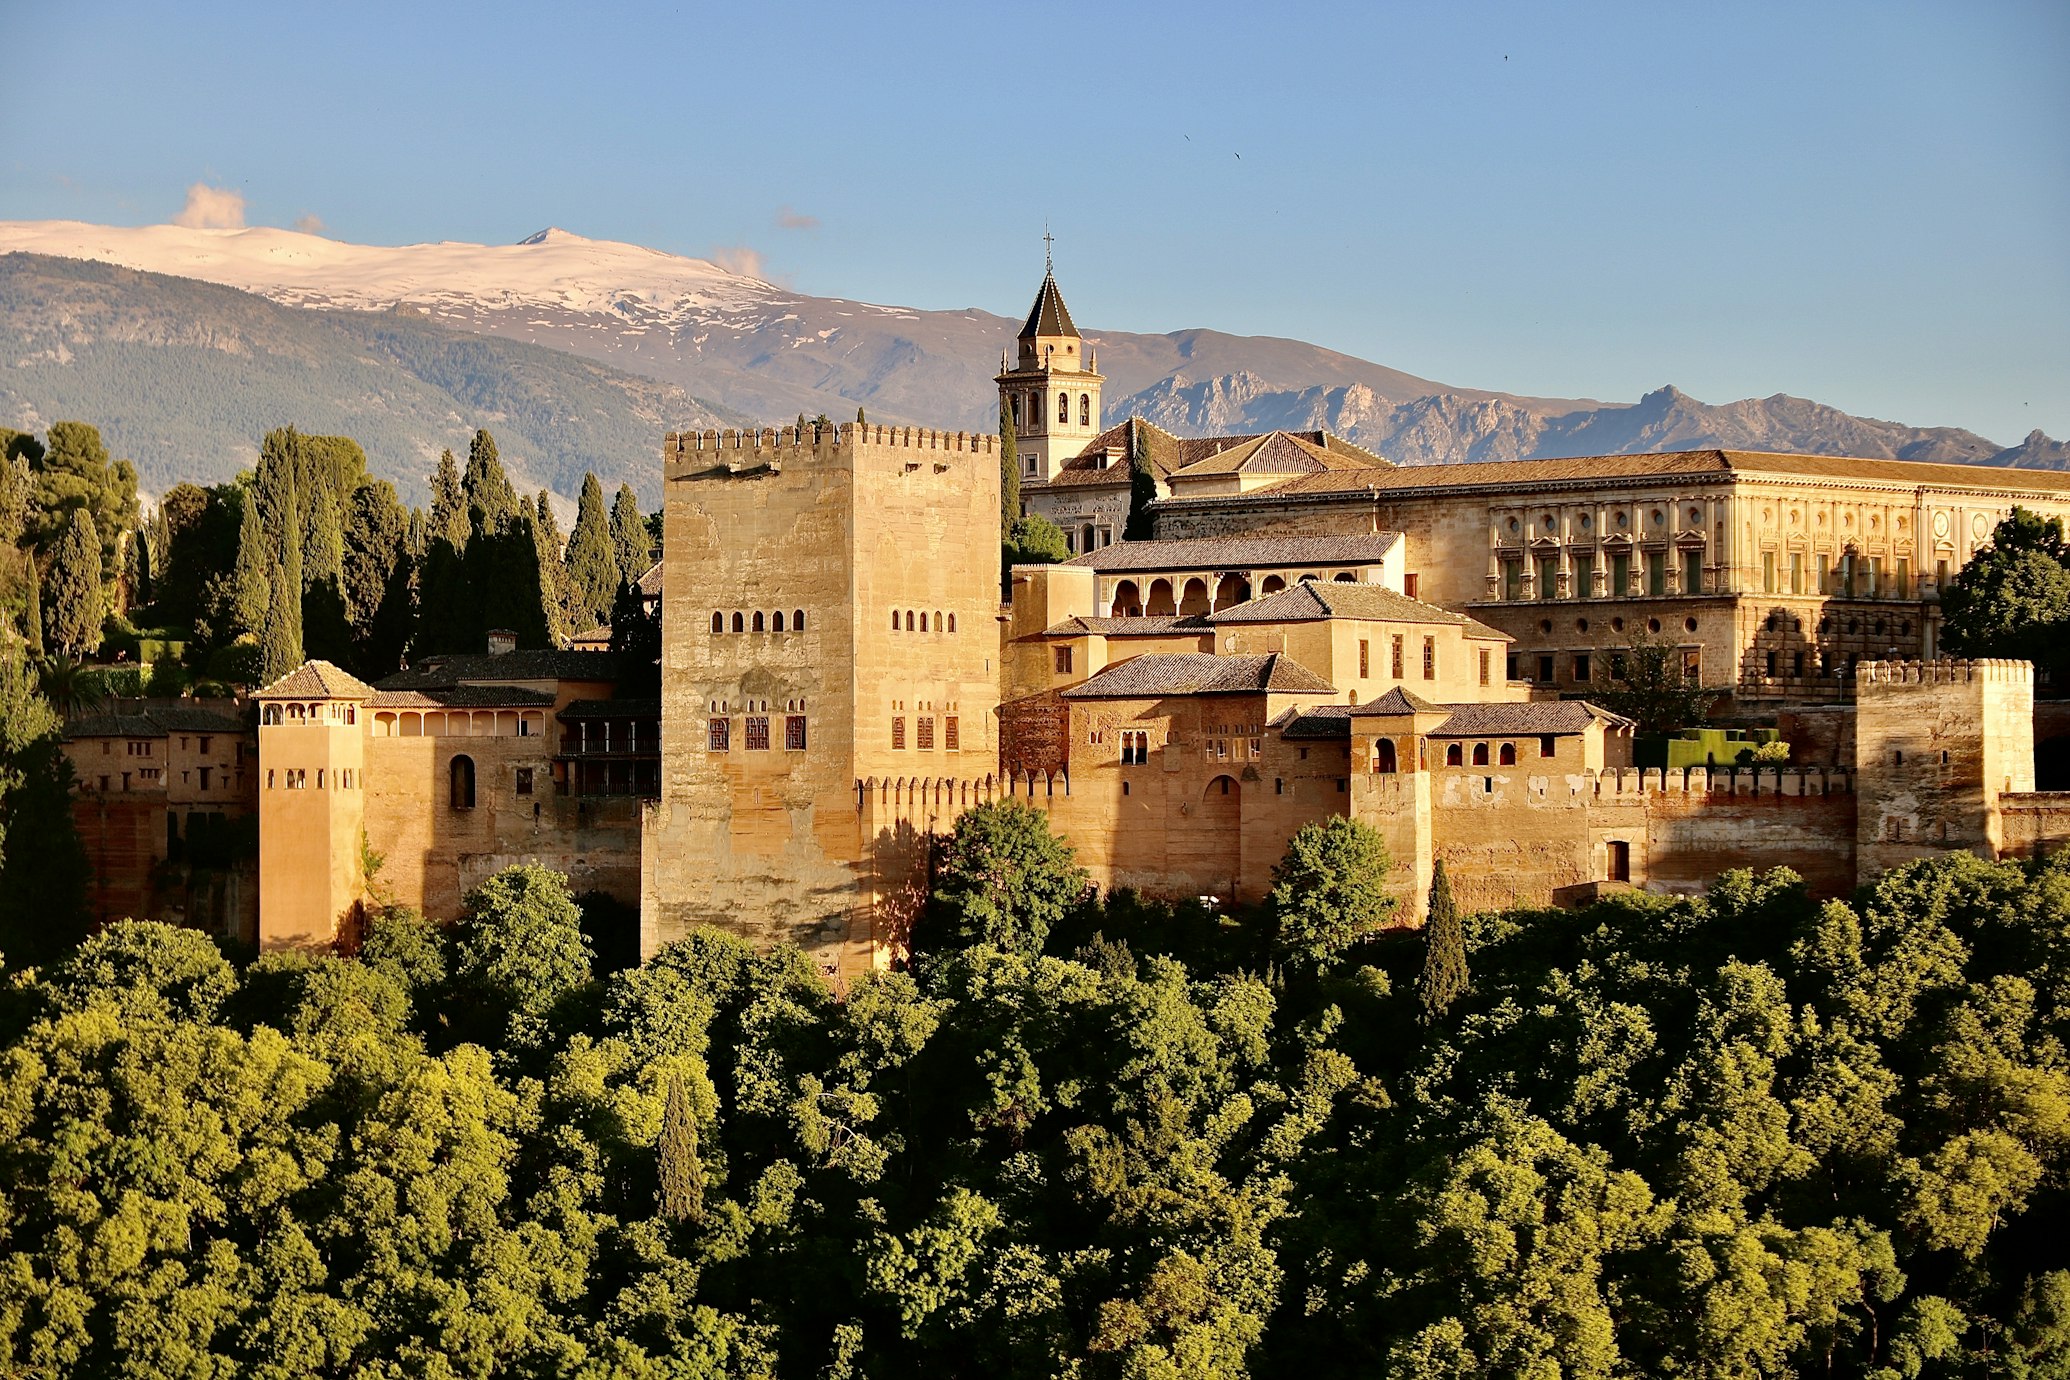 Andalusia Travel Guide - Attractions, What to See, Do, Costs, FAQs